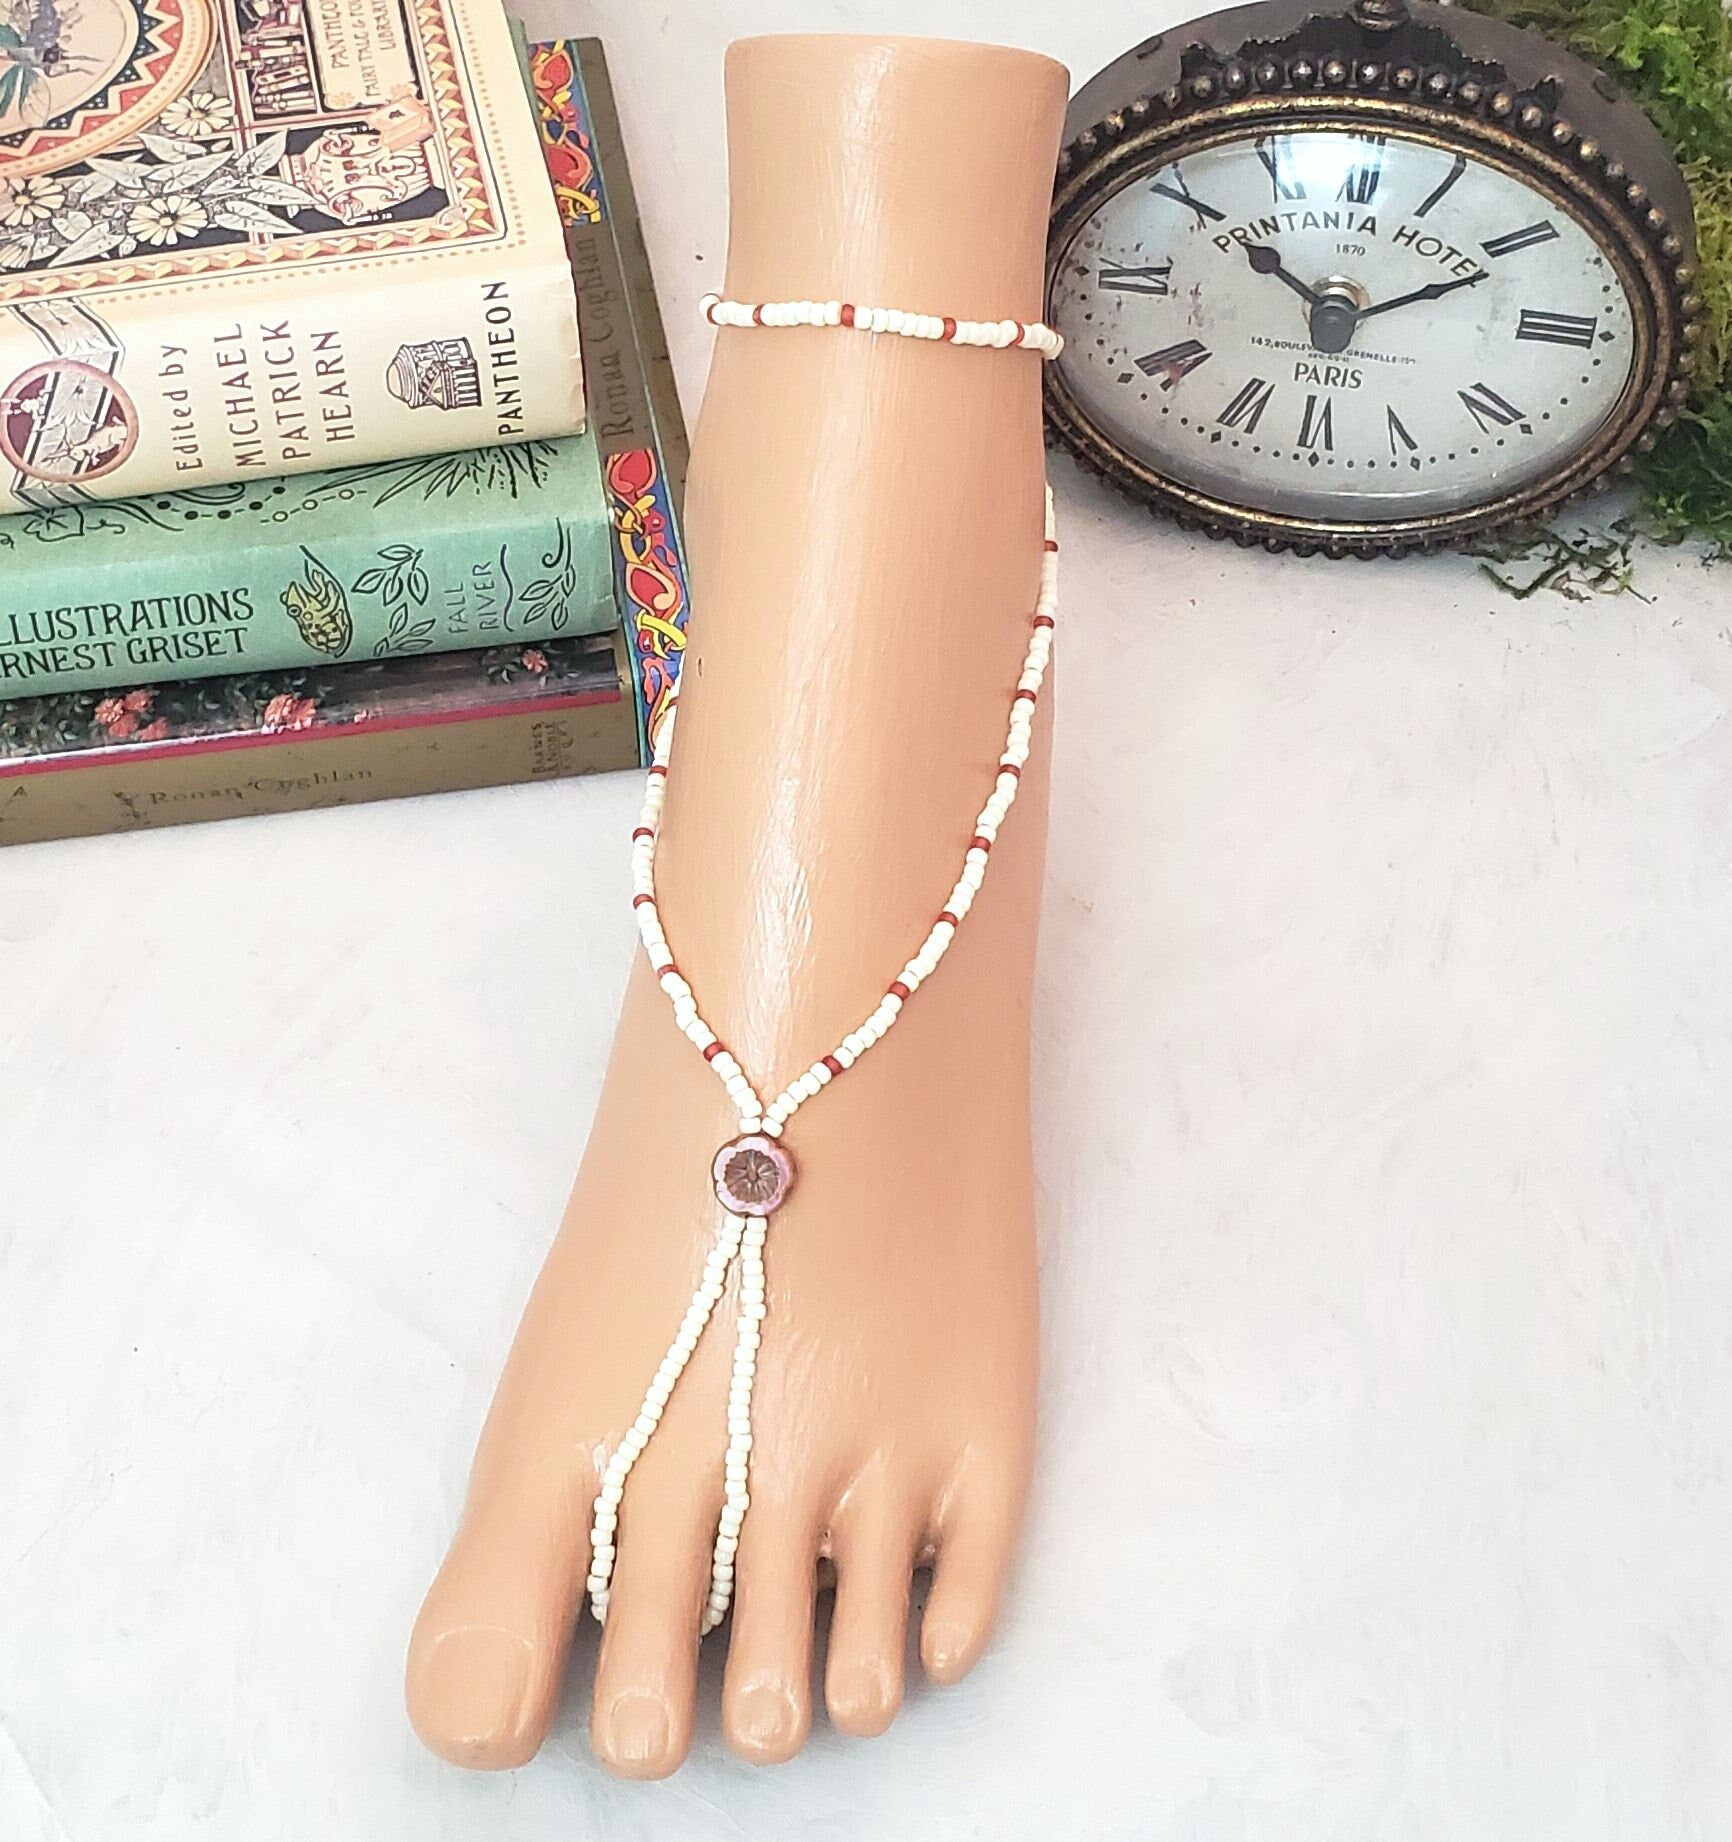 Elastic Beaded Barefoot Sandal or Hand Flower in Opaque White/Ivory + Coral + Red, Boho, Bohemian, Gypsy, Wedding, Bridesmaid